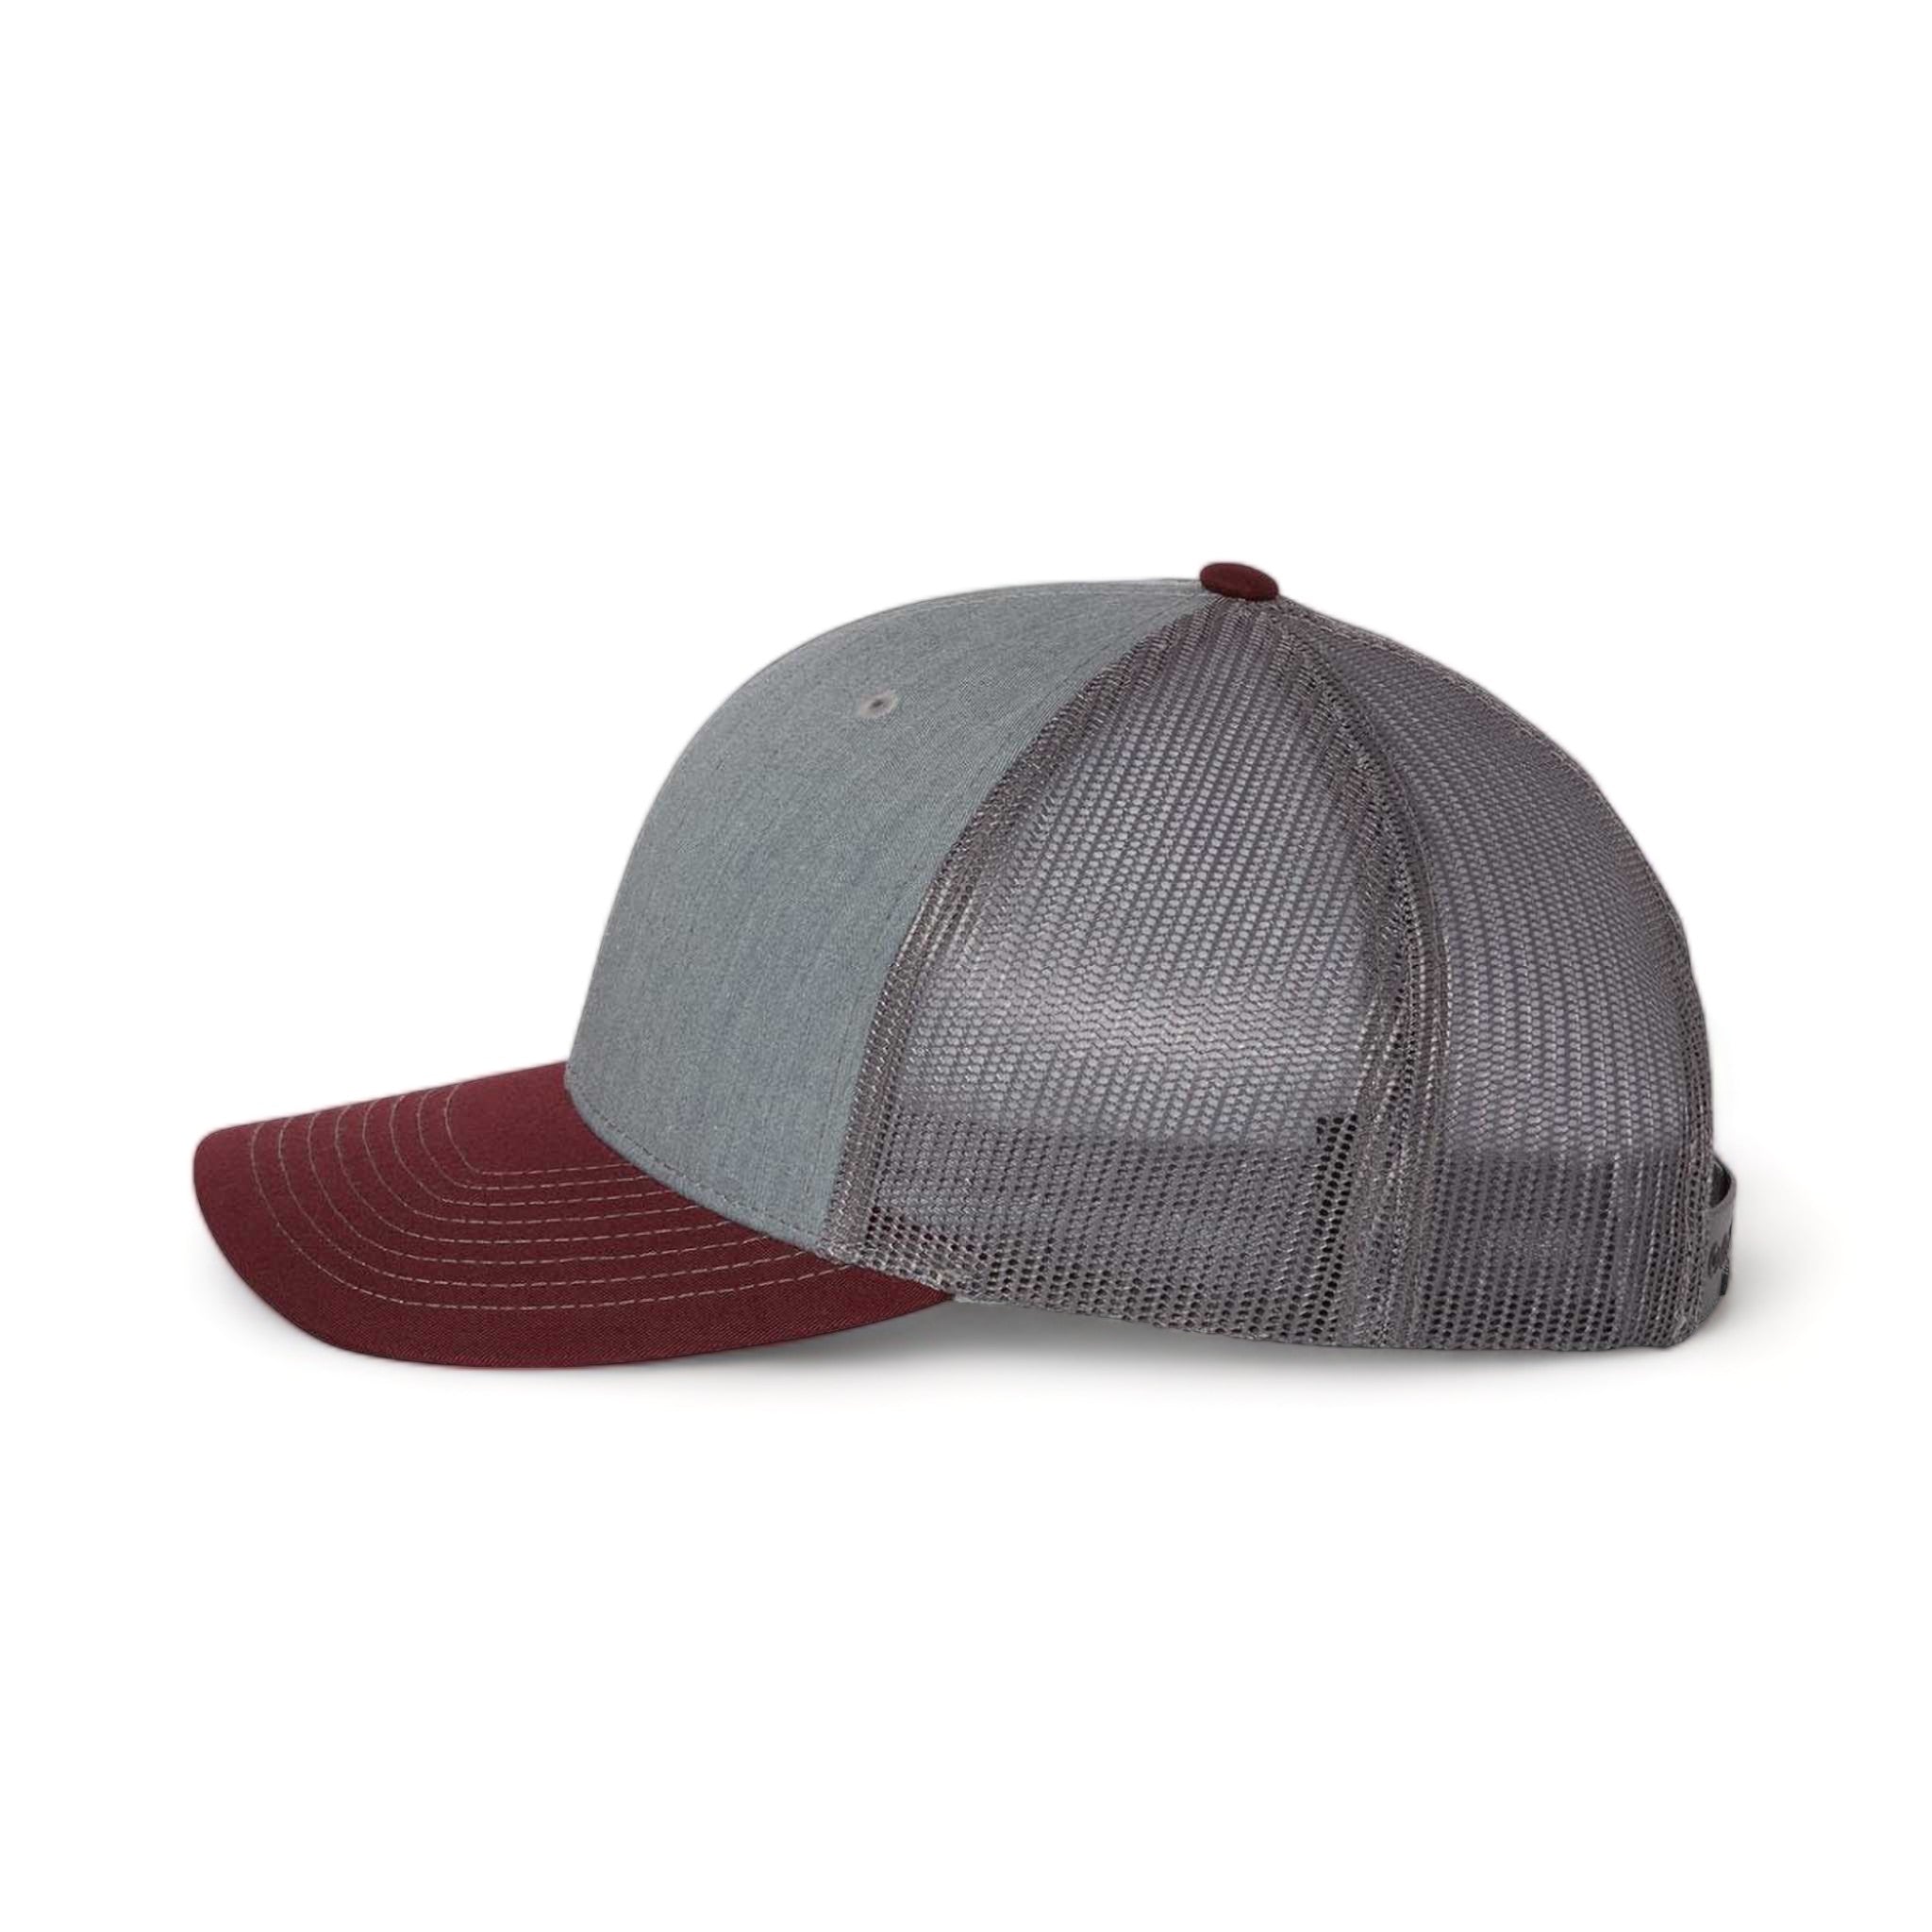 Side view of Richardson 112 custom hat in heather grey, charcoal and maroon